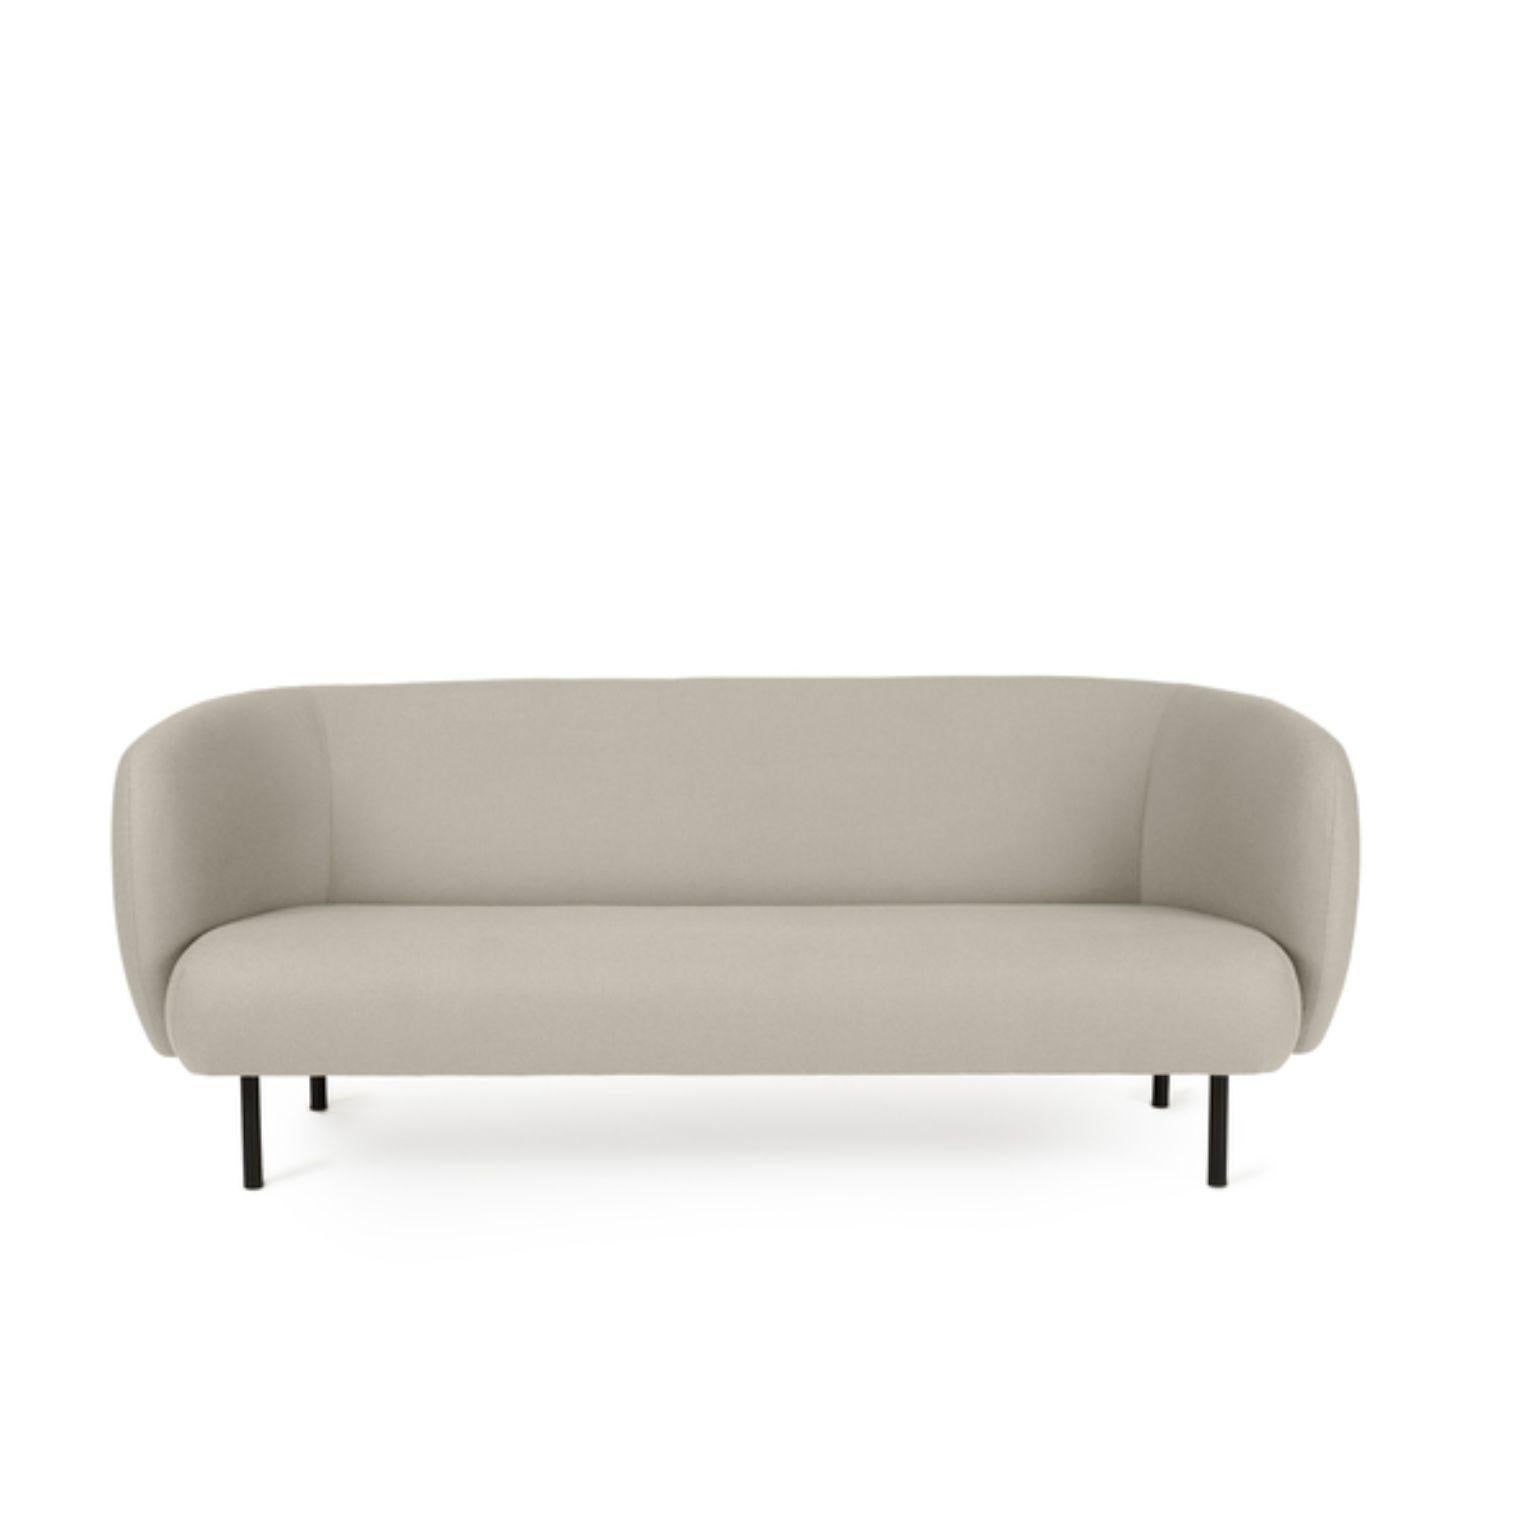 Caper 3 seater pearl grey by Warm Nordic
Dimensions: D 206 x W 84 x H 63 cm
Material: Textile upholstery, Wooden frame, Powder coated black steel legs.
Weight: 55.5 kg
Also available in different colours.

An elegant sofa with an organic